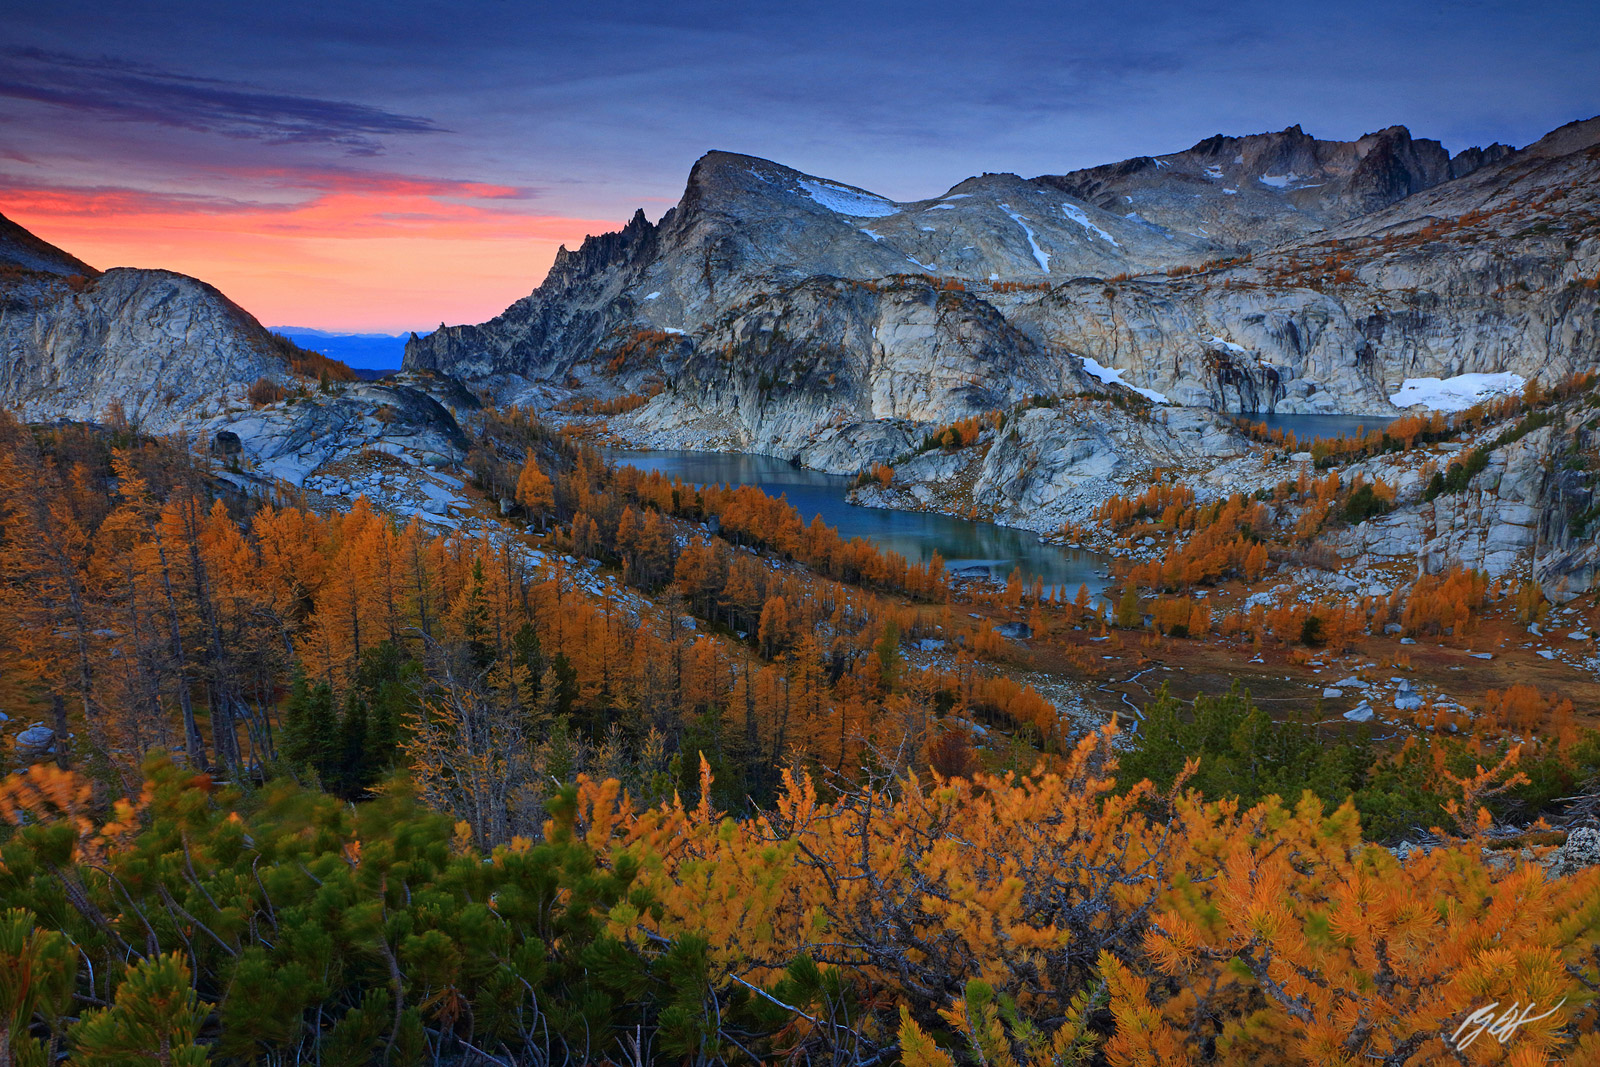 Golden Larch and Little Anna Purna in the Enchantments, Alpine Lakes Wilderness in Washington